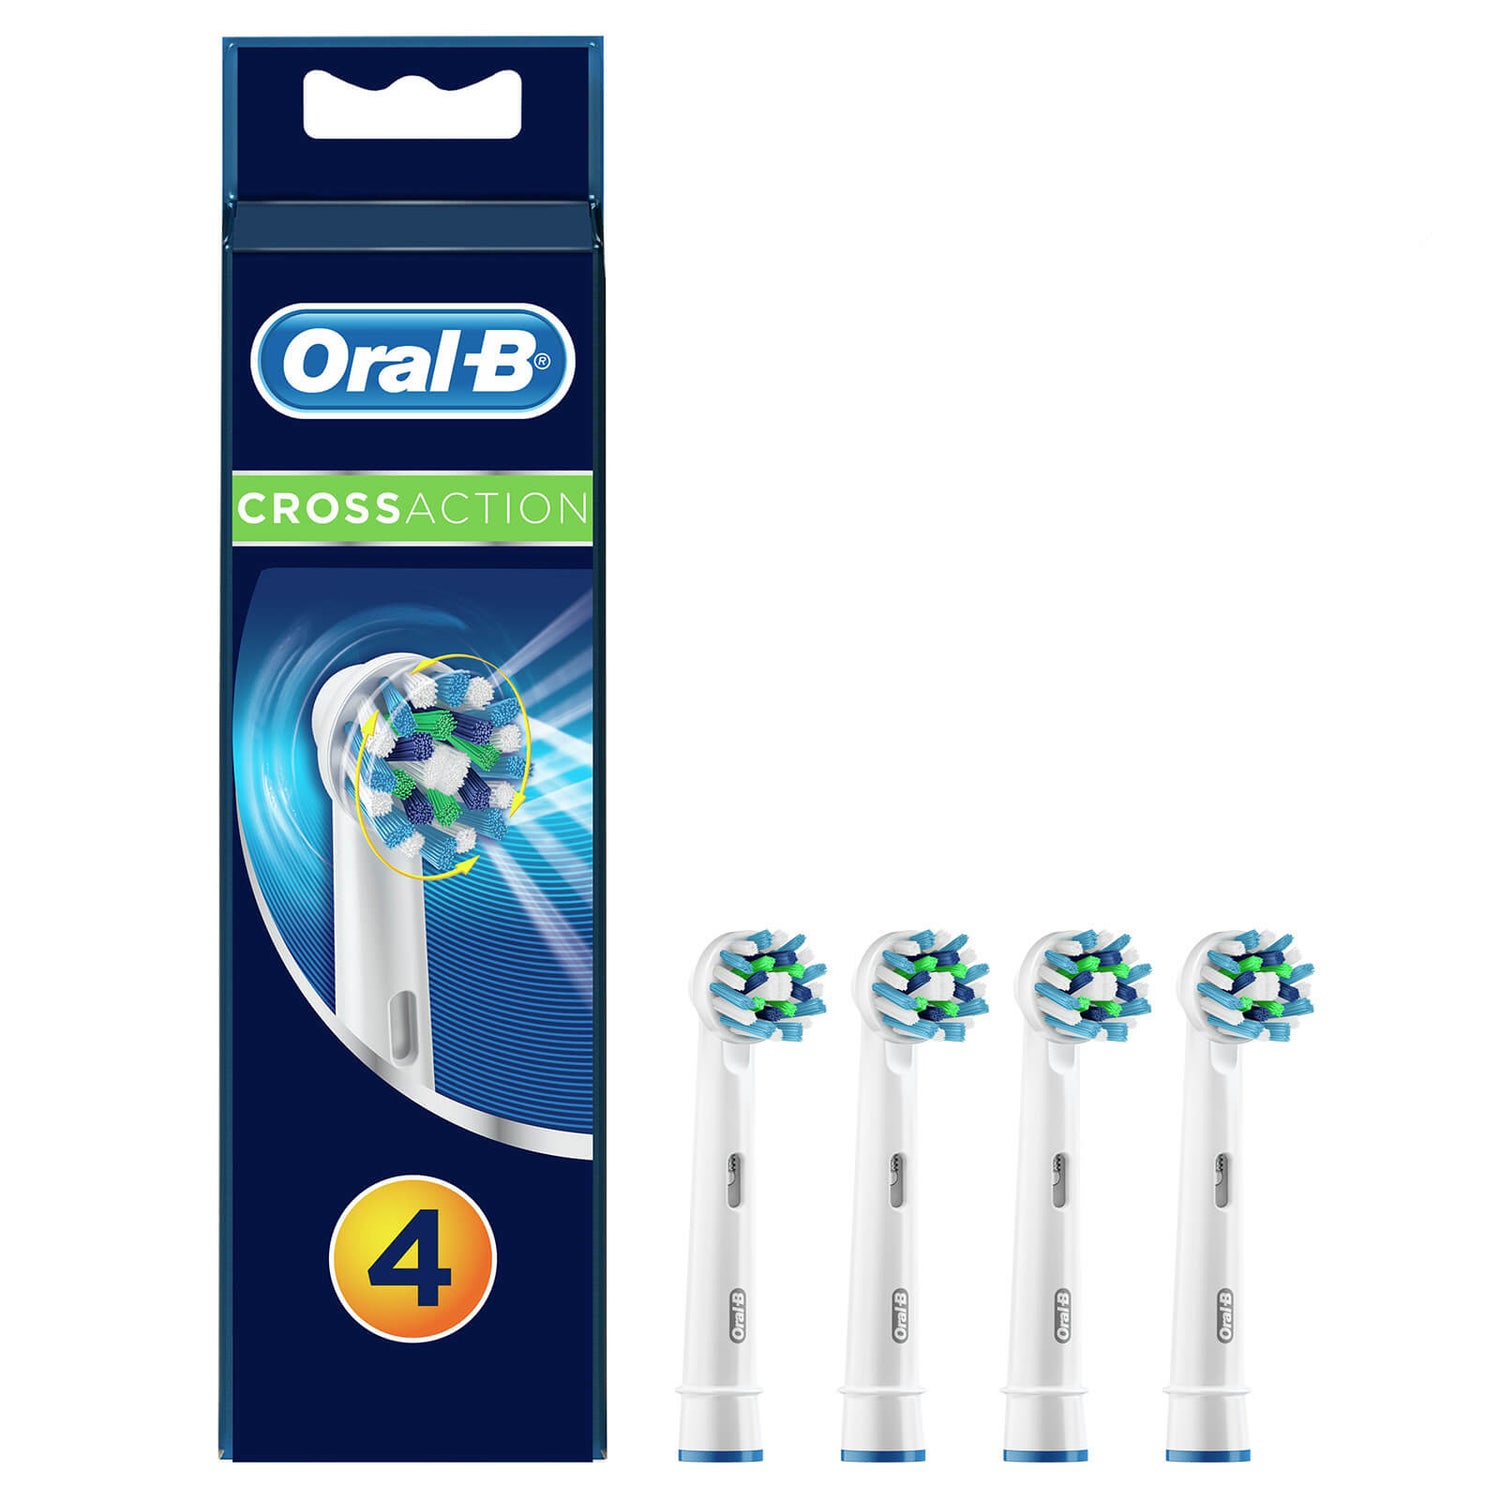 Oral-B Cross Action Toothbrush Head Refills (Pack of 4)